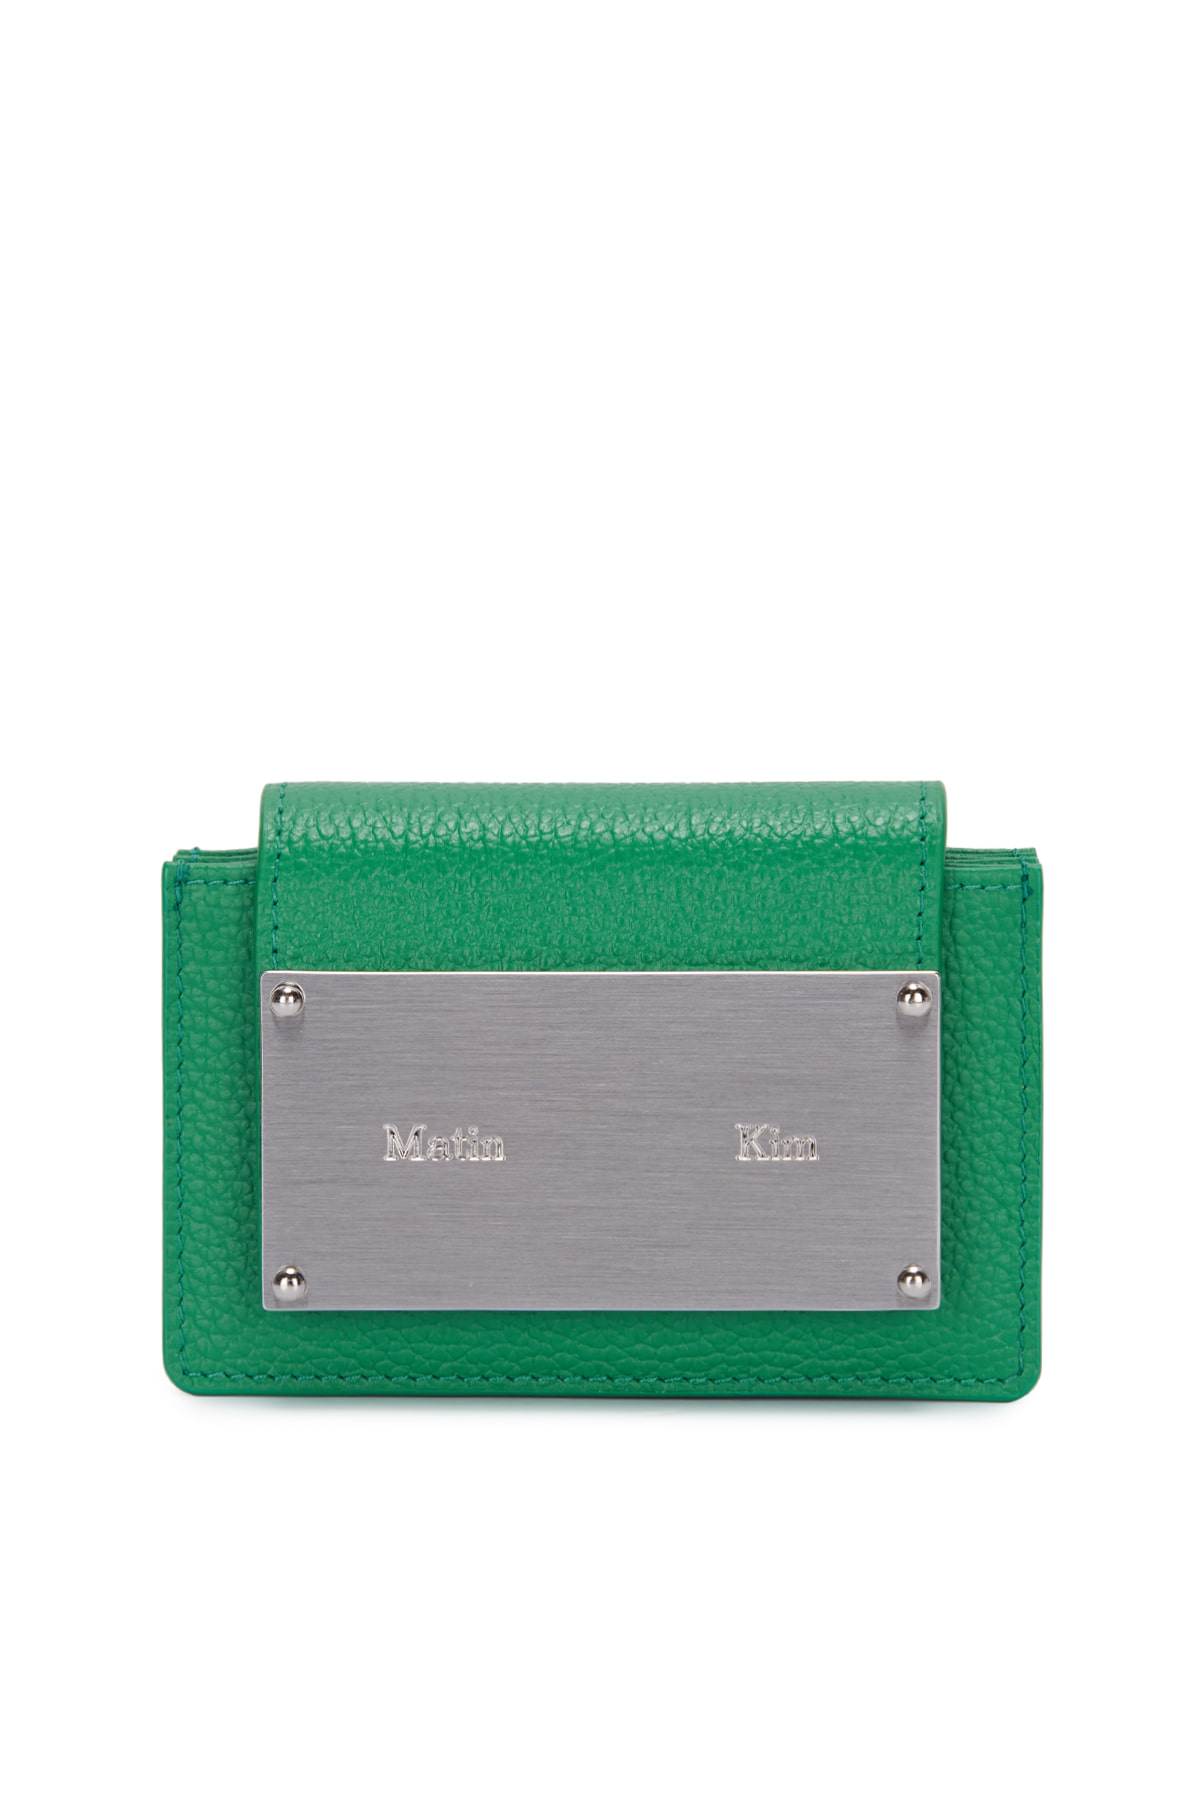 ACCORDION WALLET IN GREEN